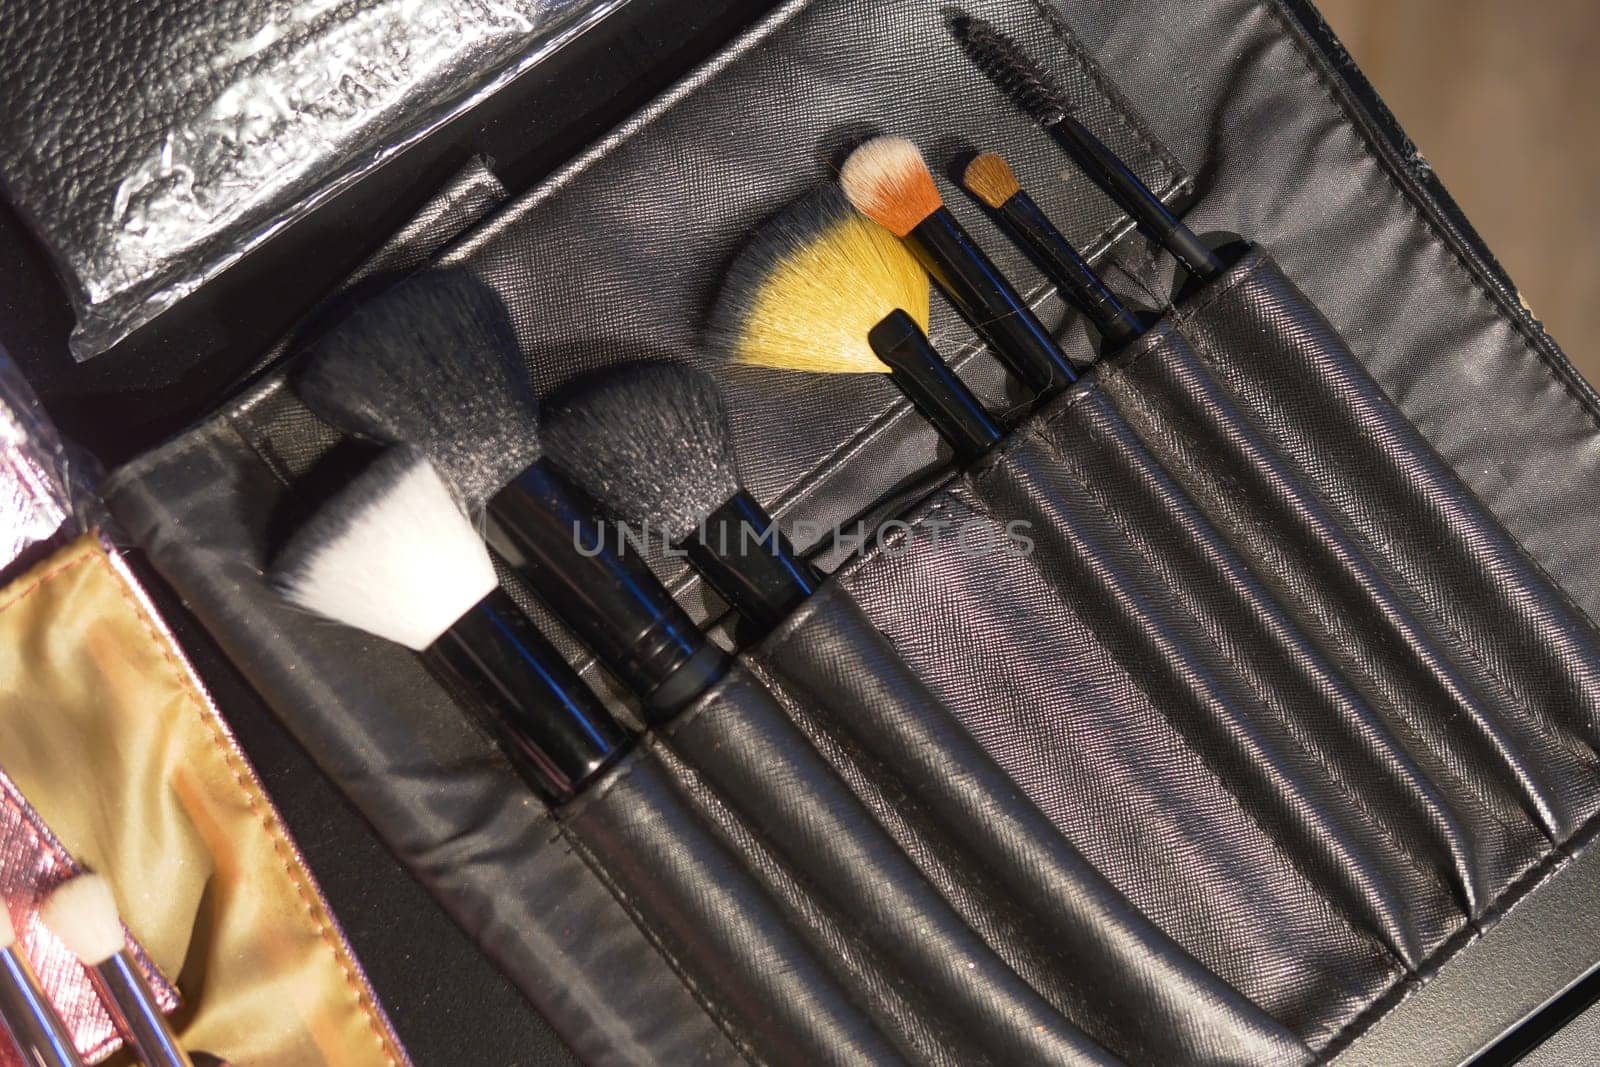 Set of makeup brushes in a sleek black case for flawless application by towfiq007